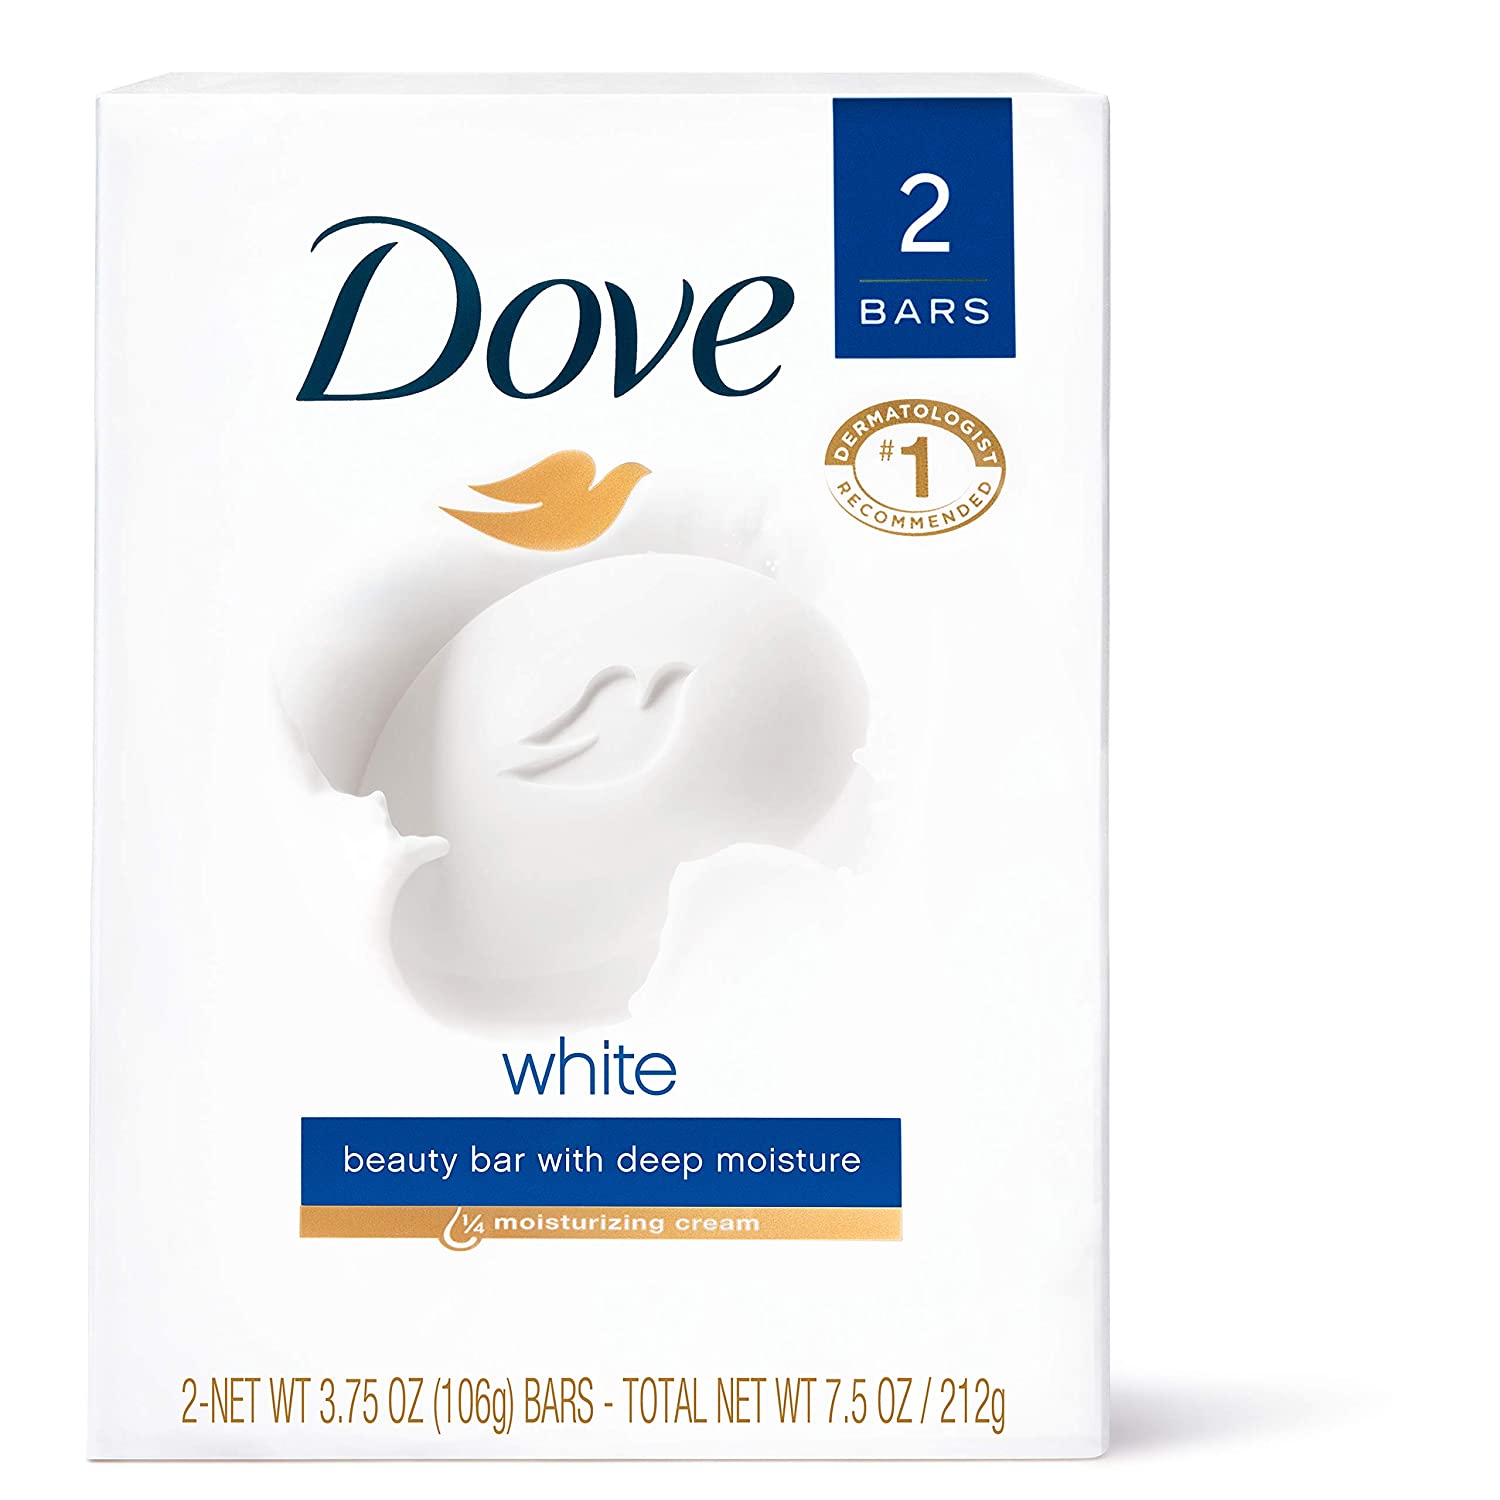 Dove Beauty Bar with 1/4 Moisturizing Cream & Effective Washes Away Bacteria for Skin, 2 Ct- 7.5 Oz (212g)